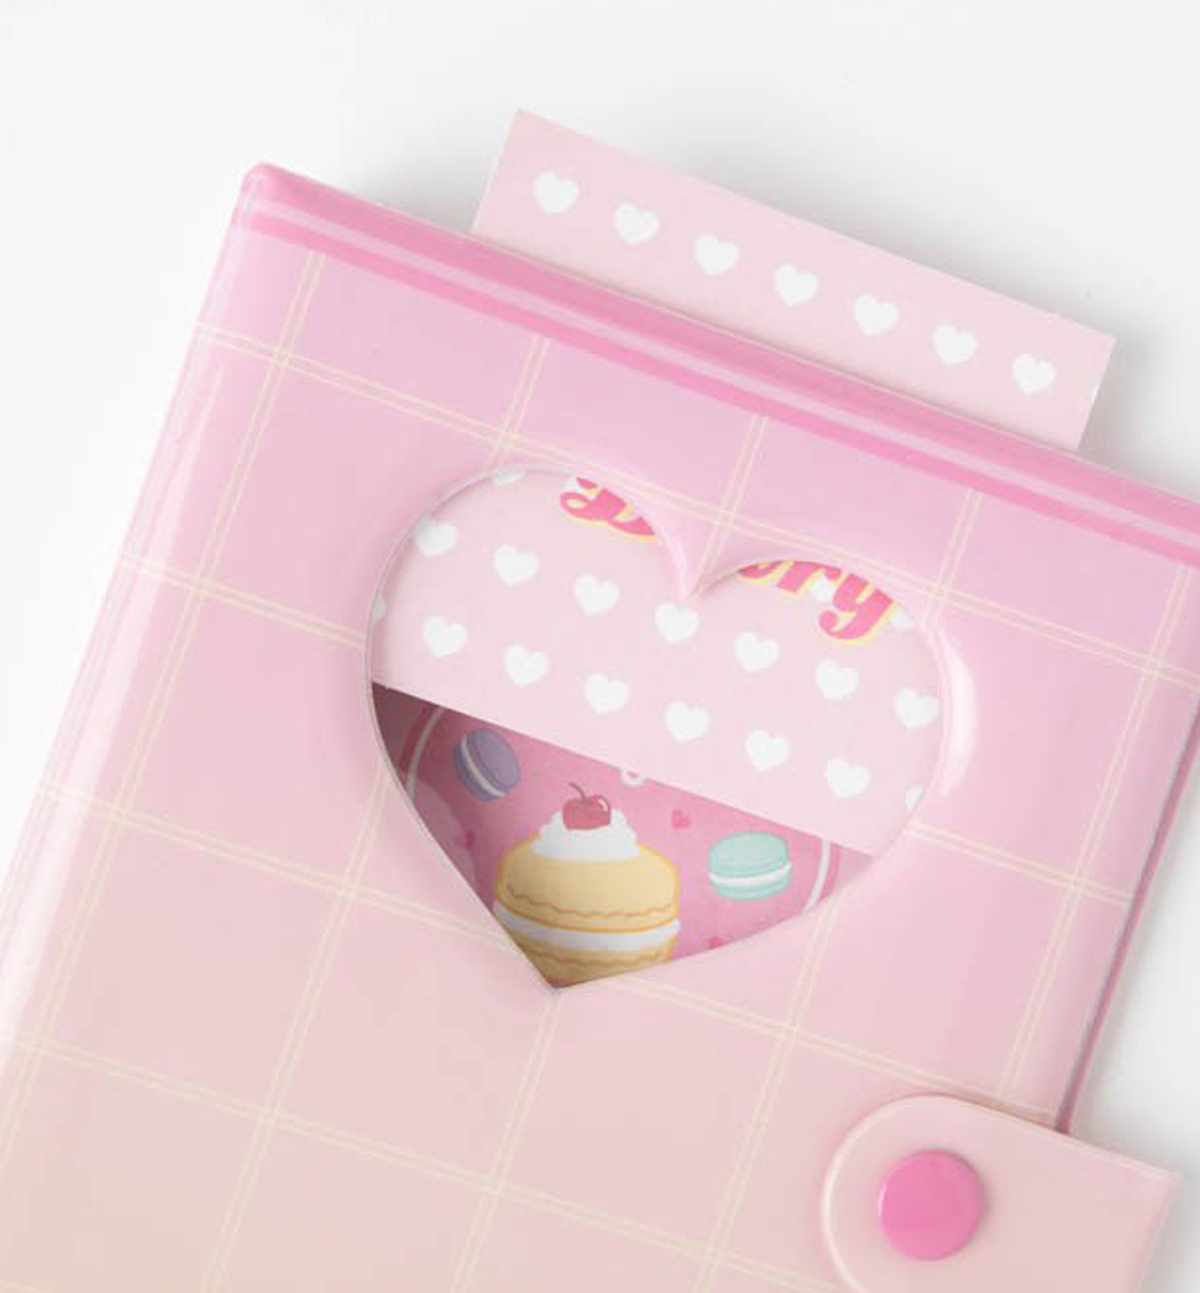 A6 Sweet Binder Cover + Cover Refill